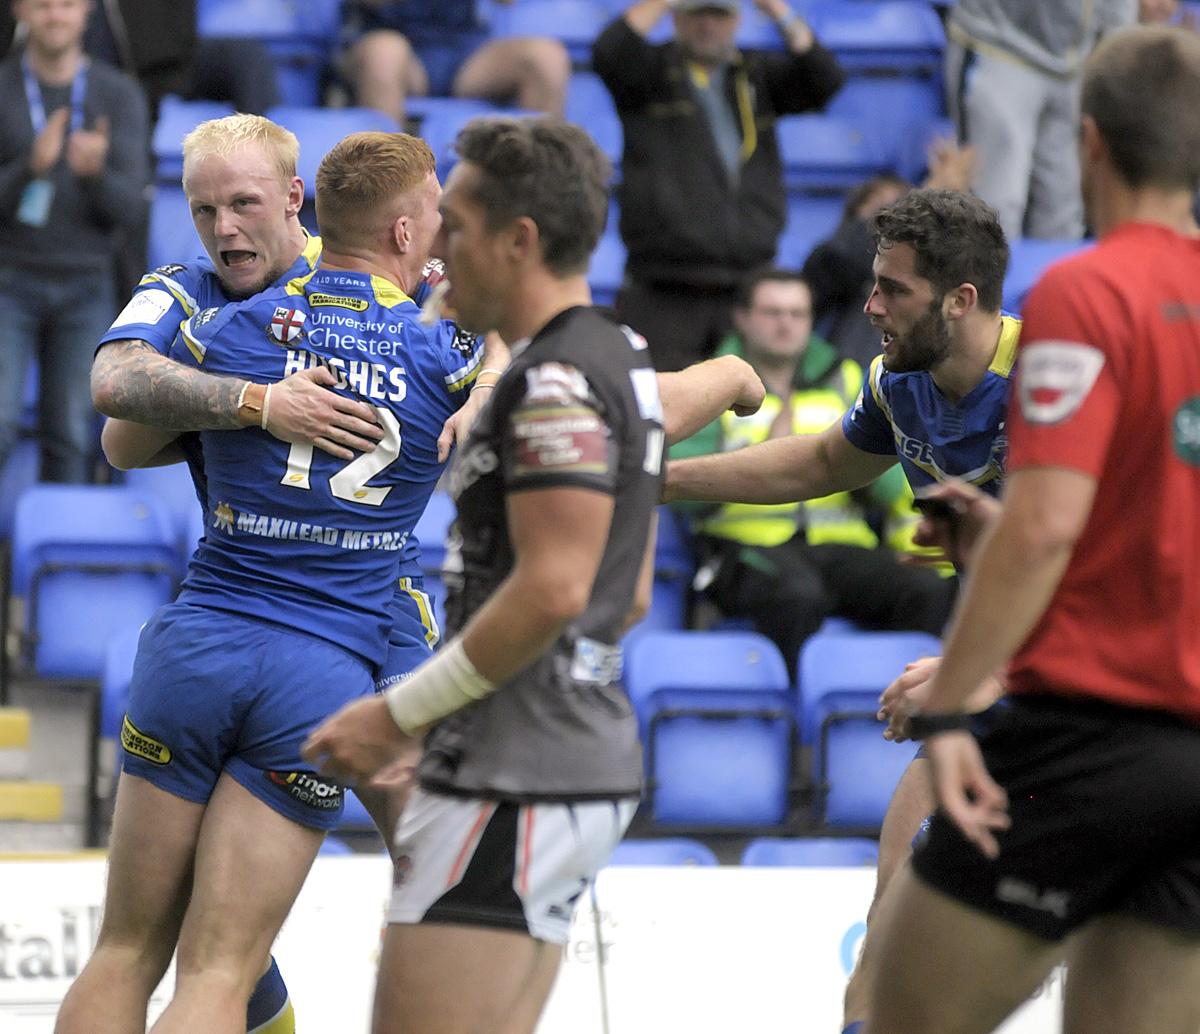 All the action as Warrington Wolves defeat Castleford Tigers 14-11. Pictures by Mike Boden